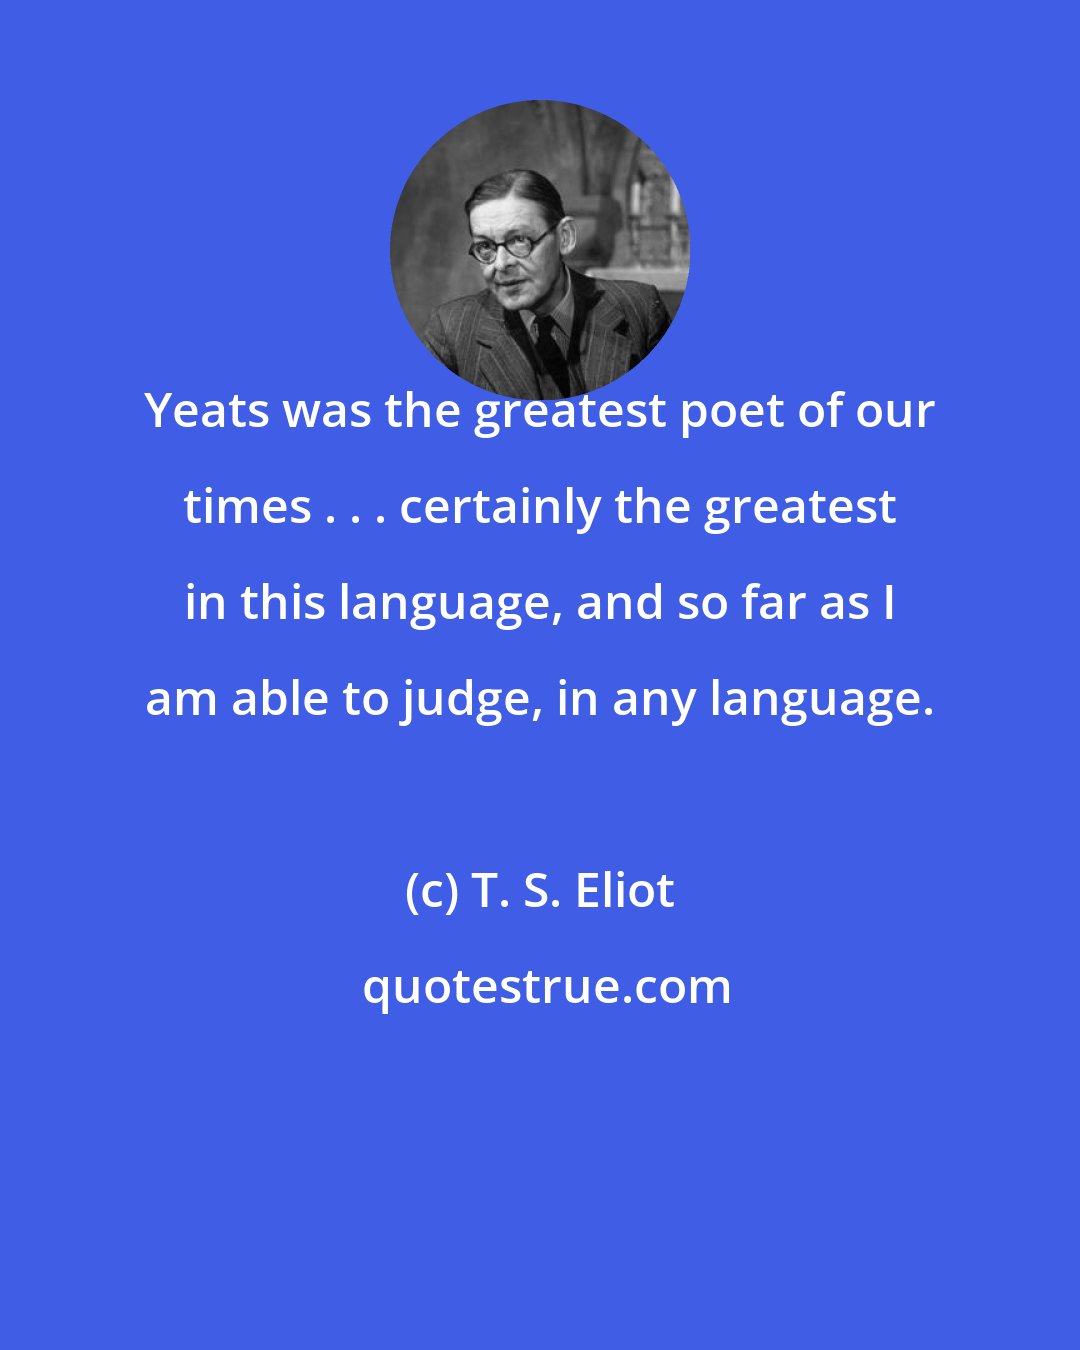 T. S. Eliot: Yeats was the greatest poet of our times . . . certainly the greatest in this language, and so far as I am able to judge, in any language.